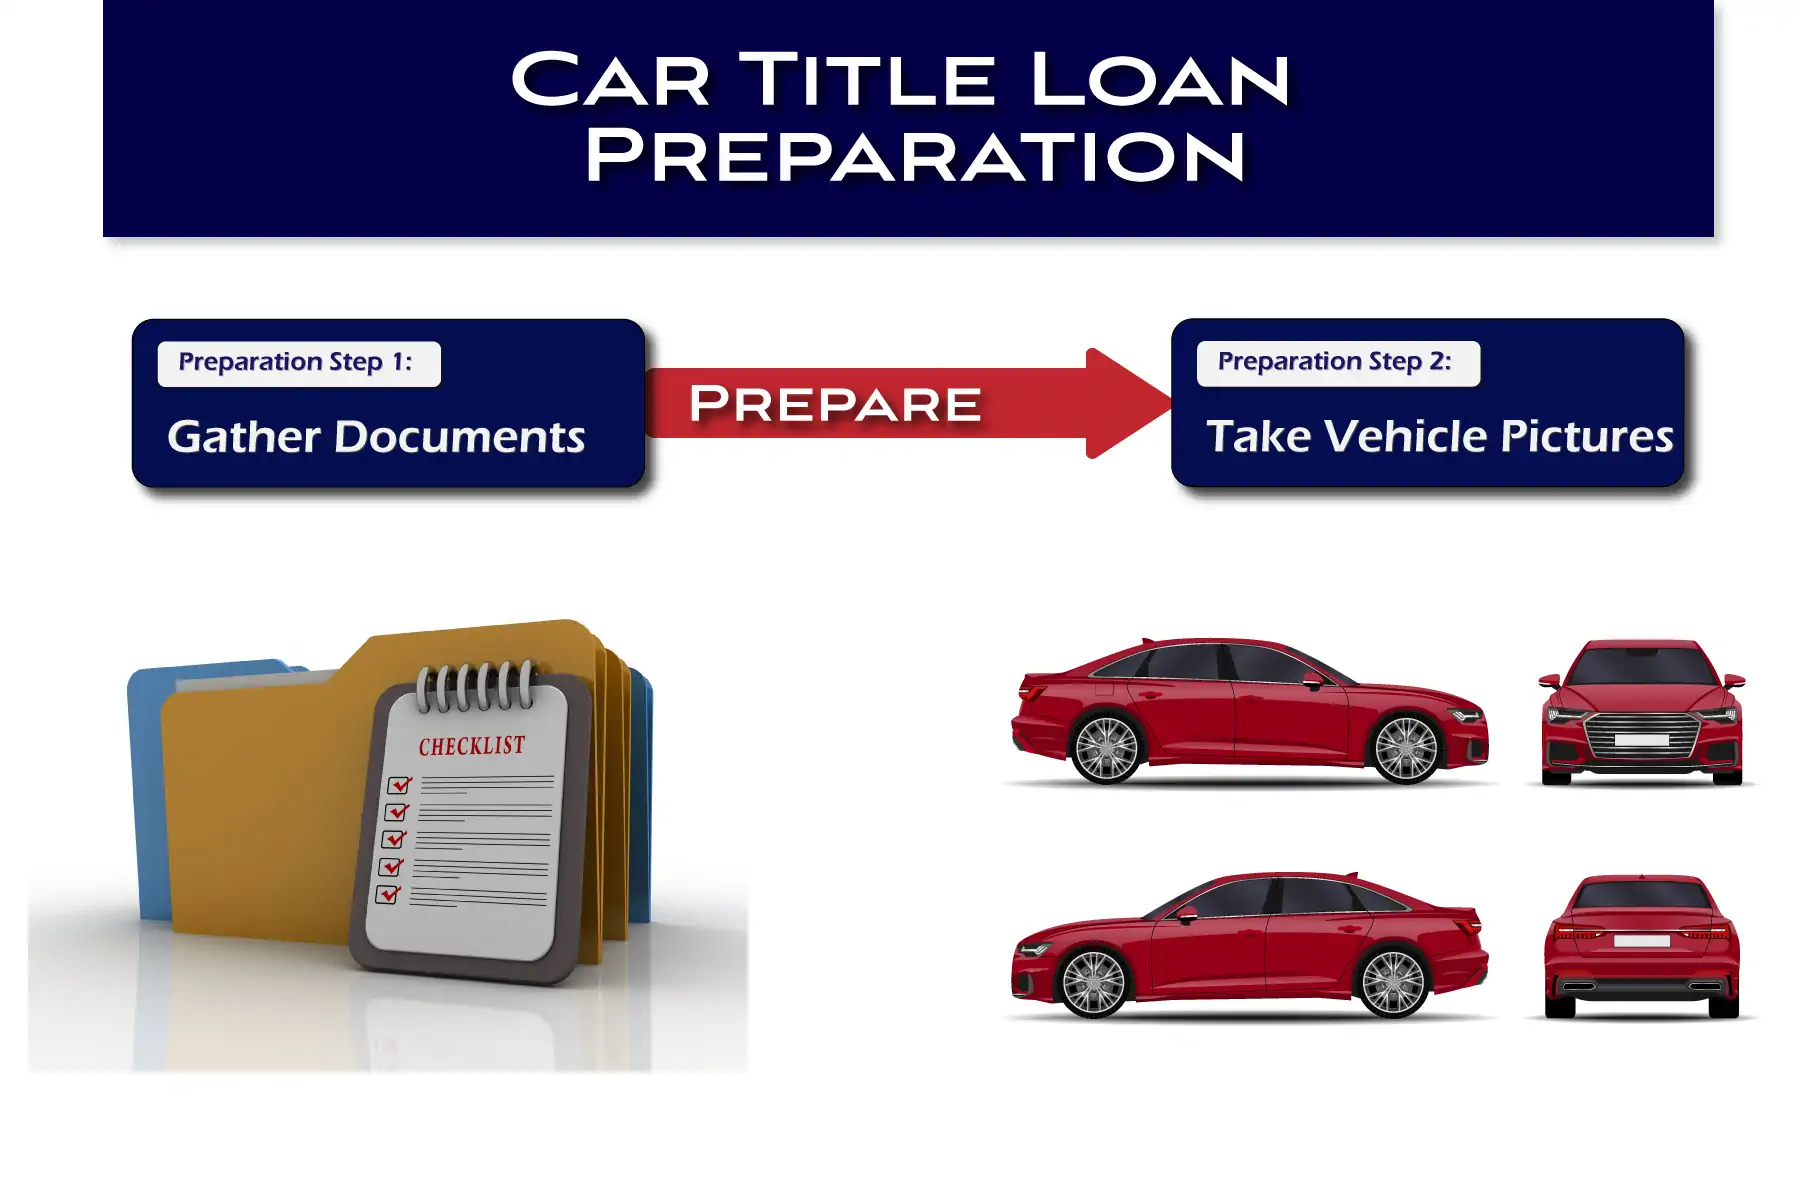 Online Title Loan Preparation steps 1 and 2.